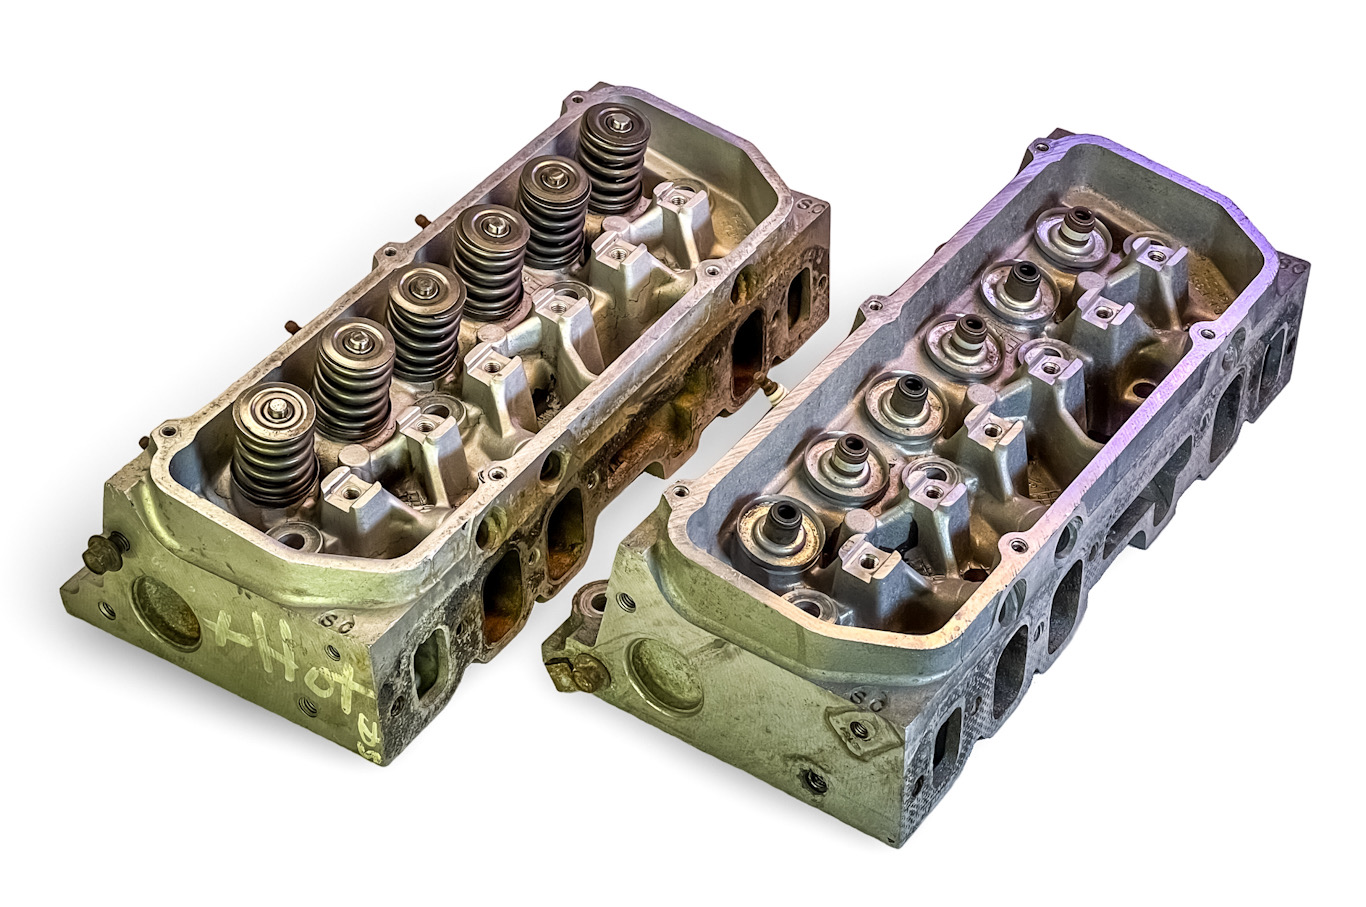 PRE OWNED GENUINE OEM FORD CYLINDER HEAD PAIR - GOOD CONDITION  |  1989-93 THUNDERBIRD 3.8L SC SUPERCHARGED  -  RF-E9SE 6090-D7A